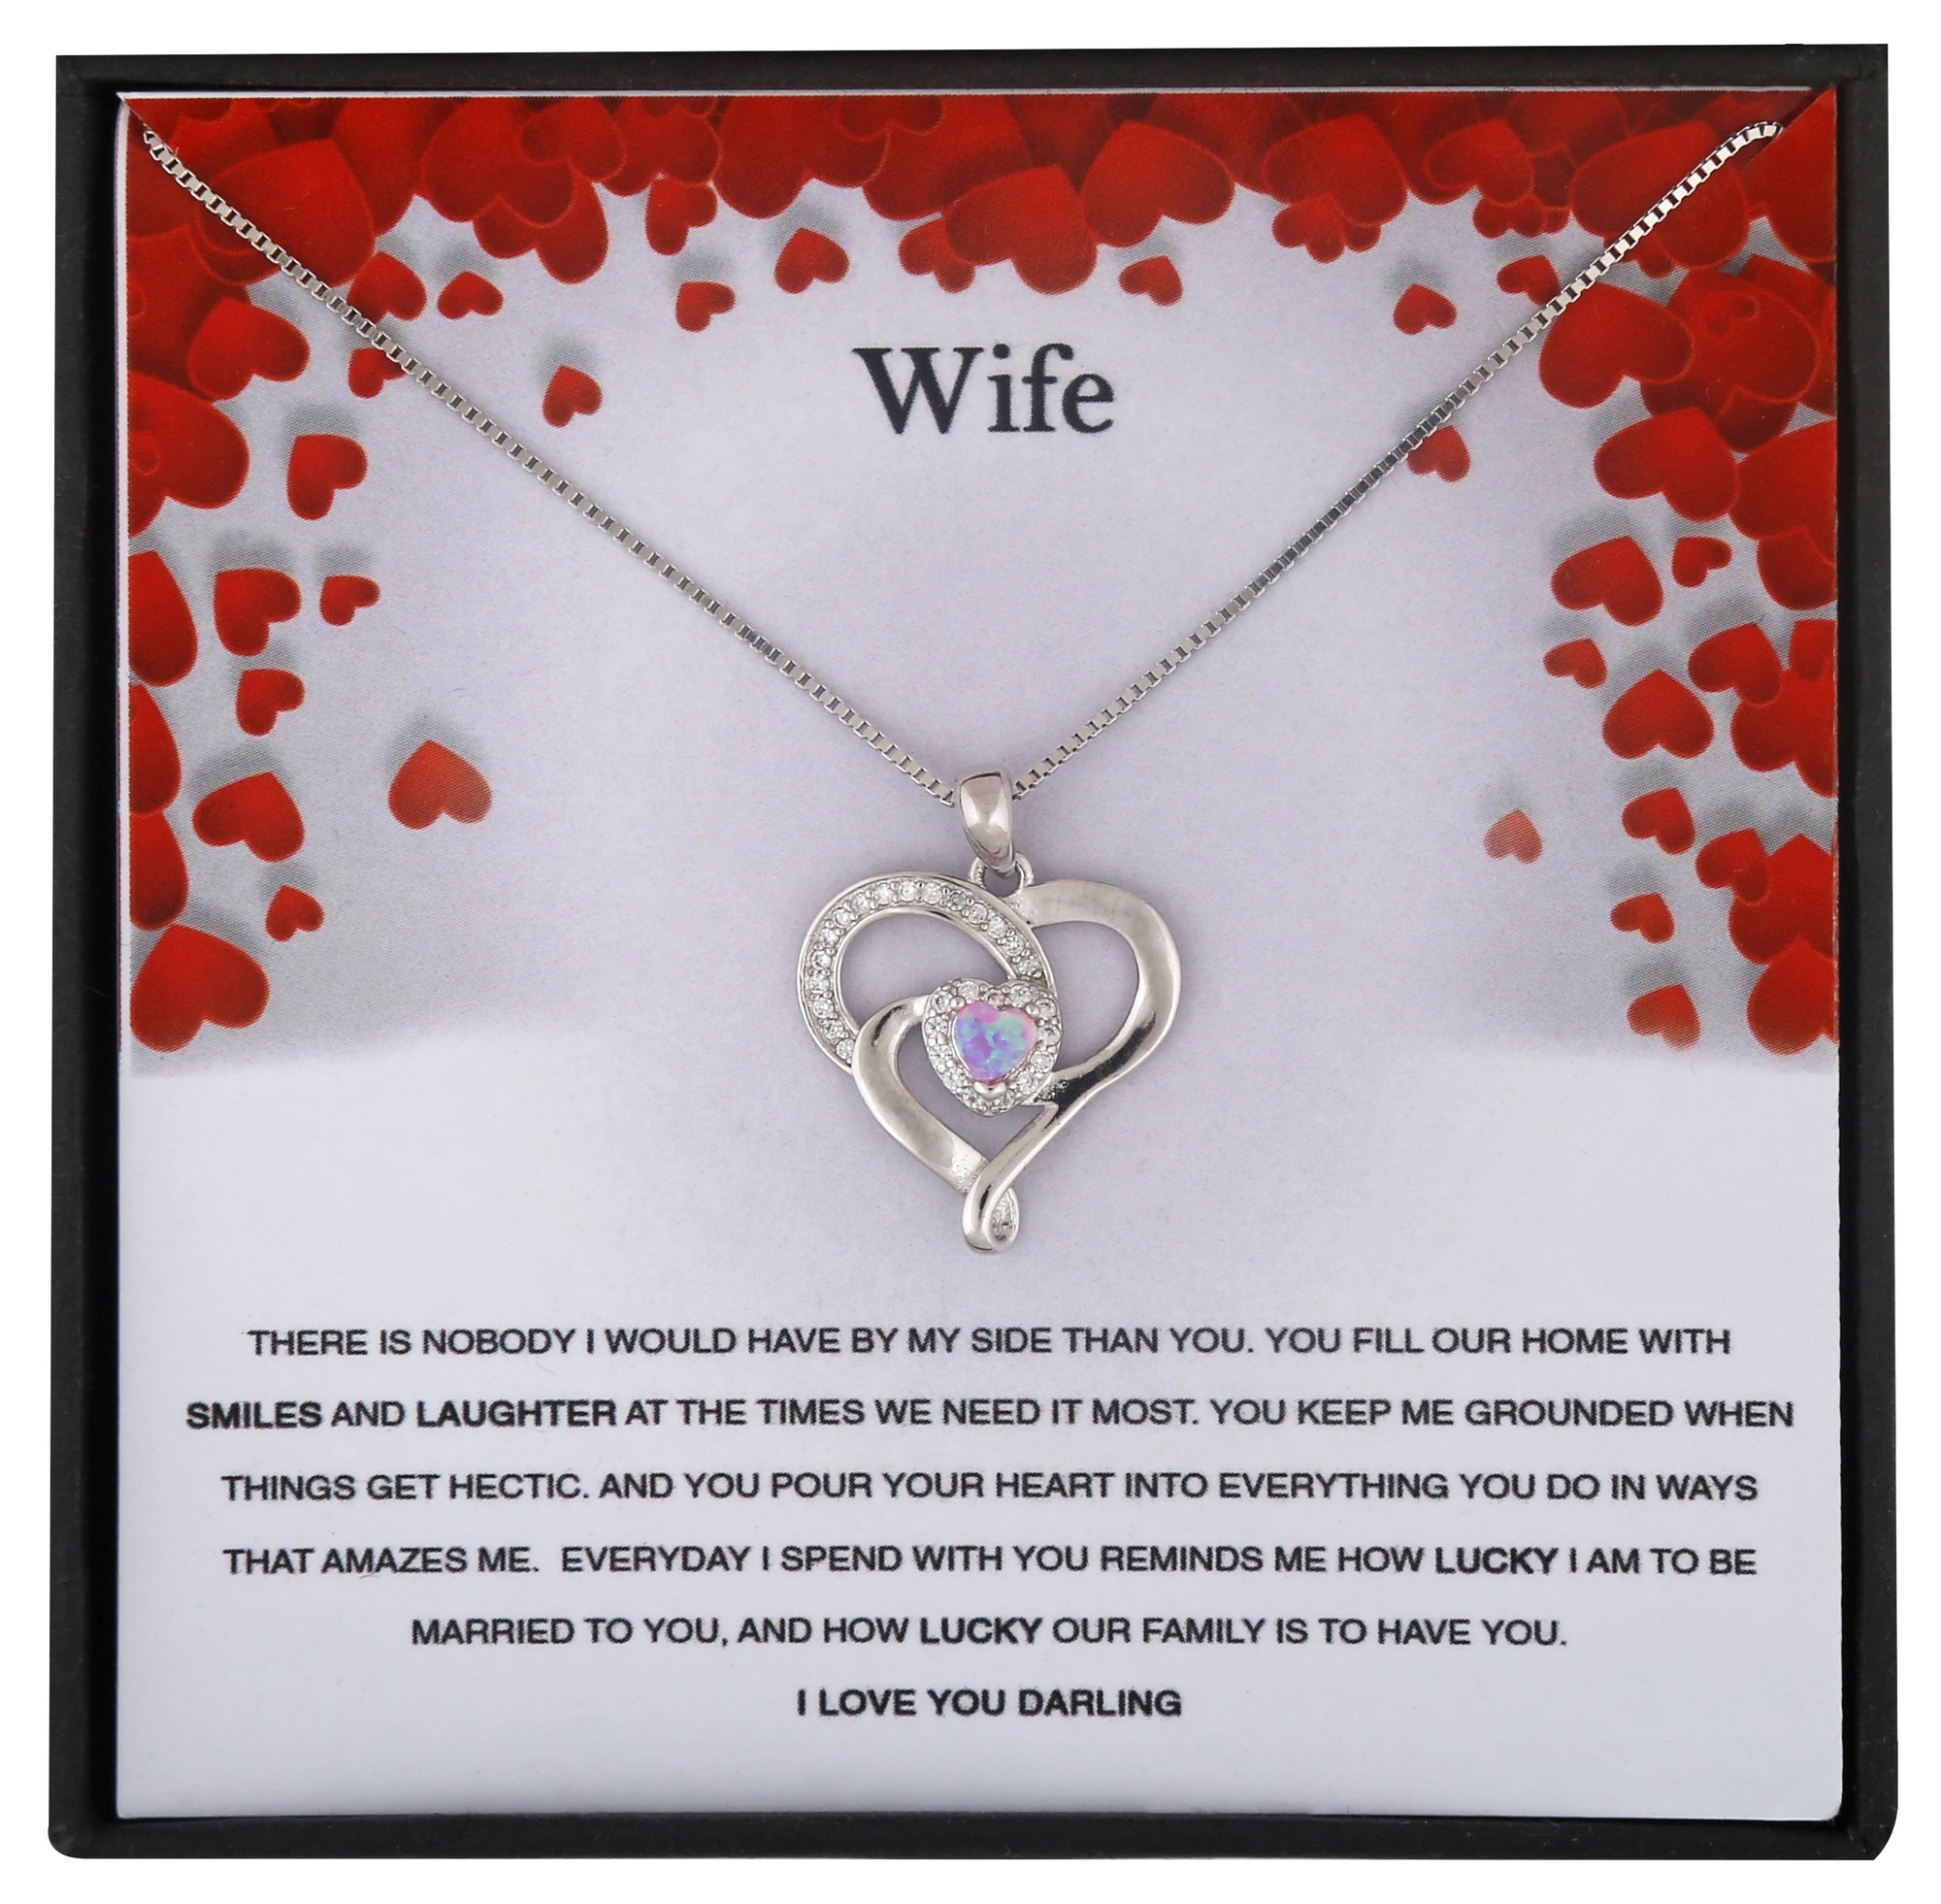 Wife Personalised Gift With Sterling Silver Pendant Necklace